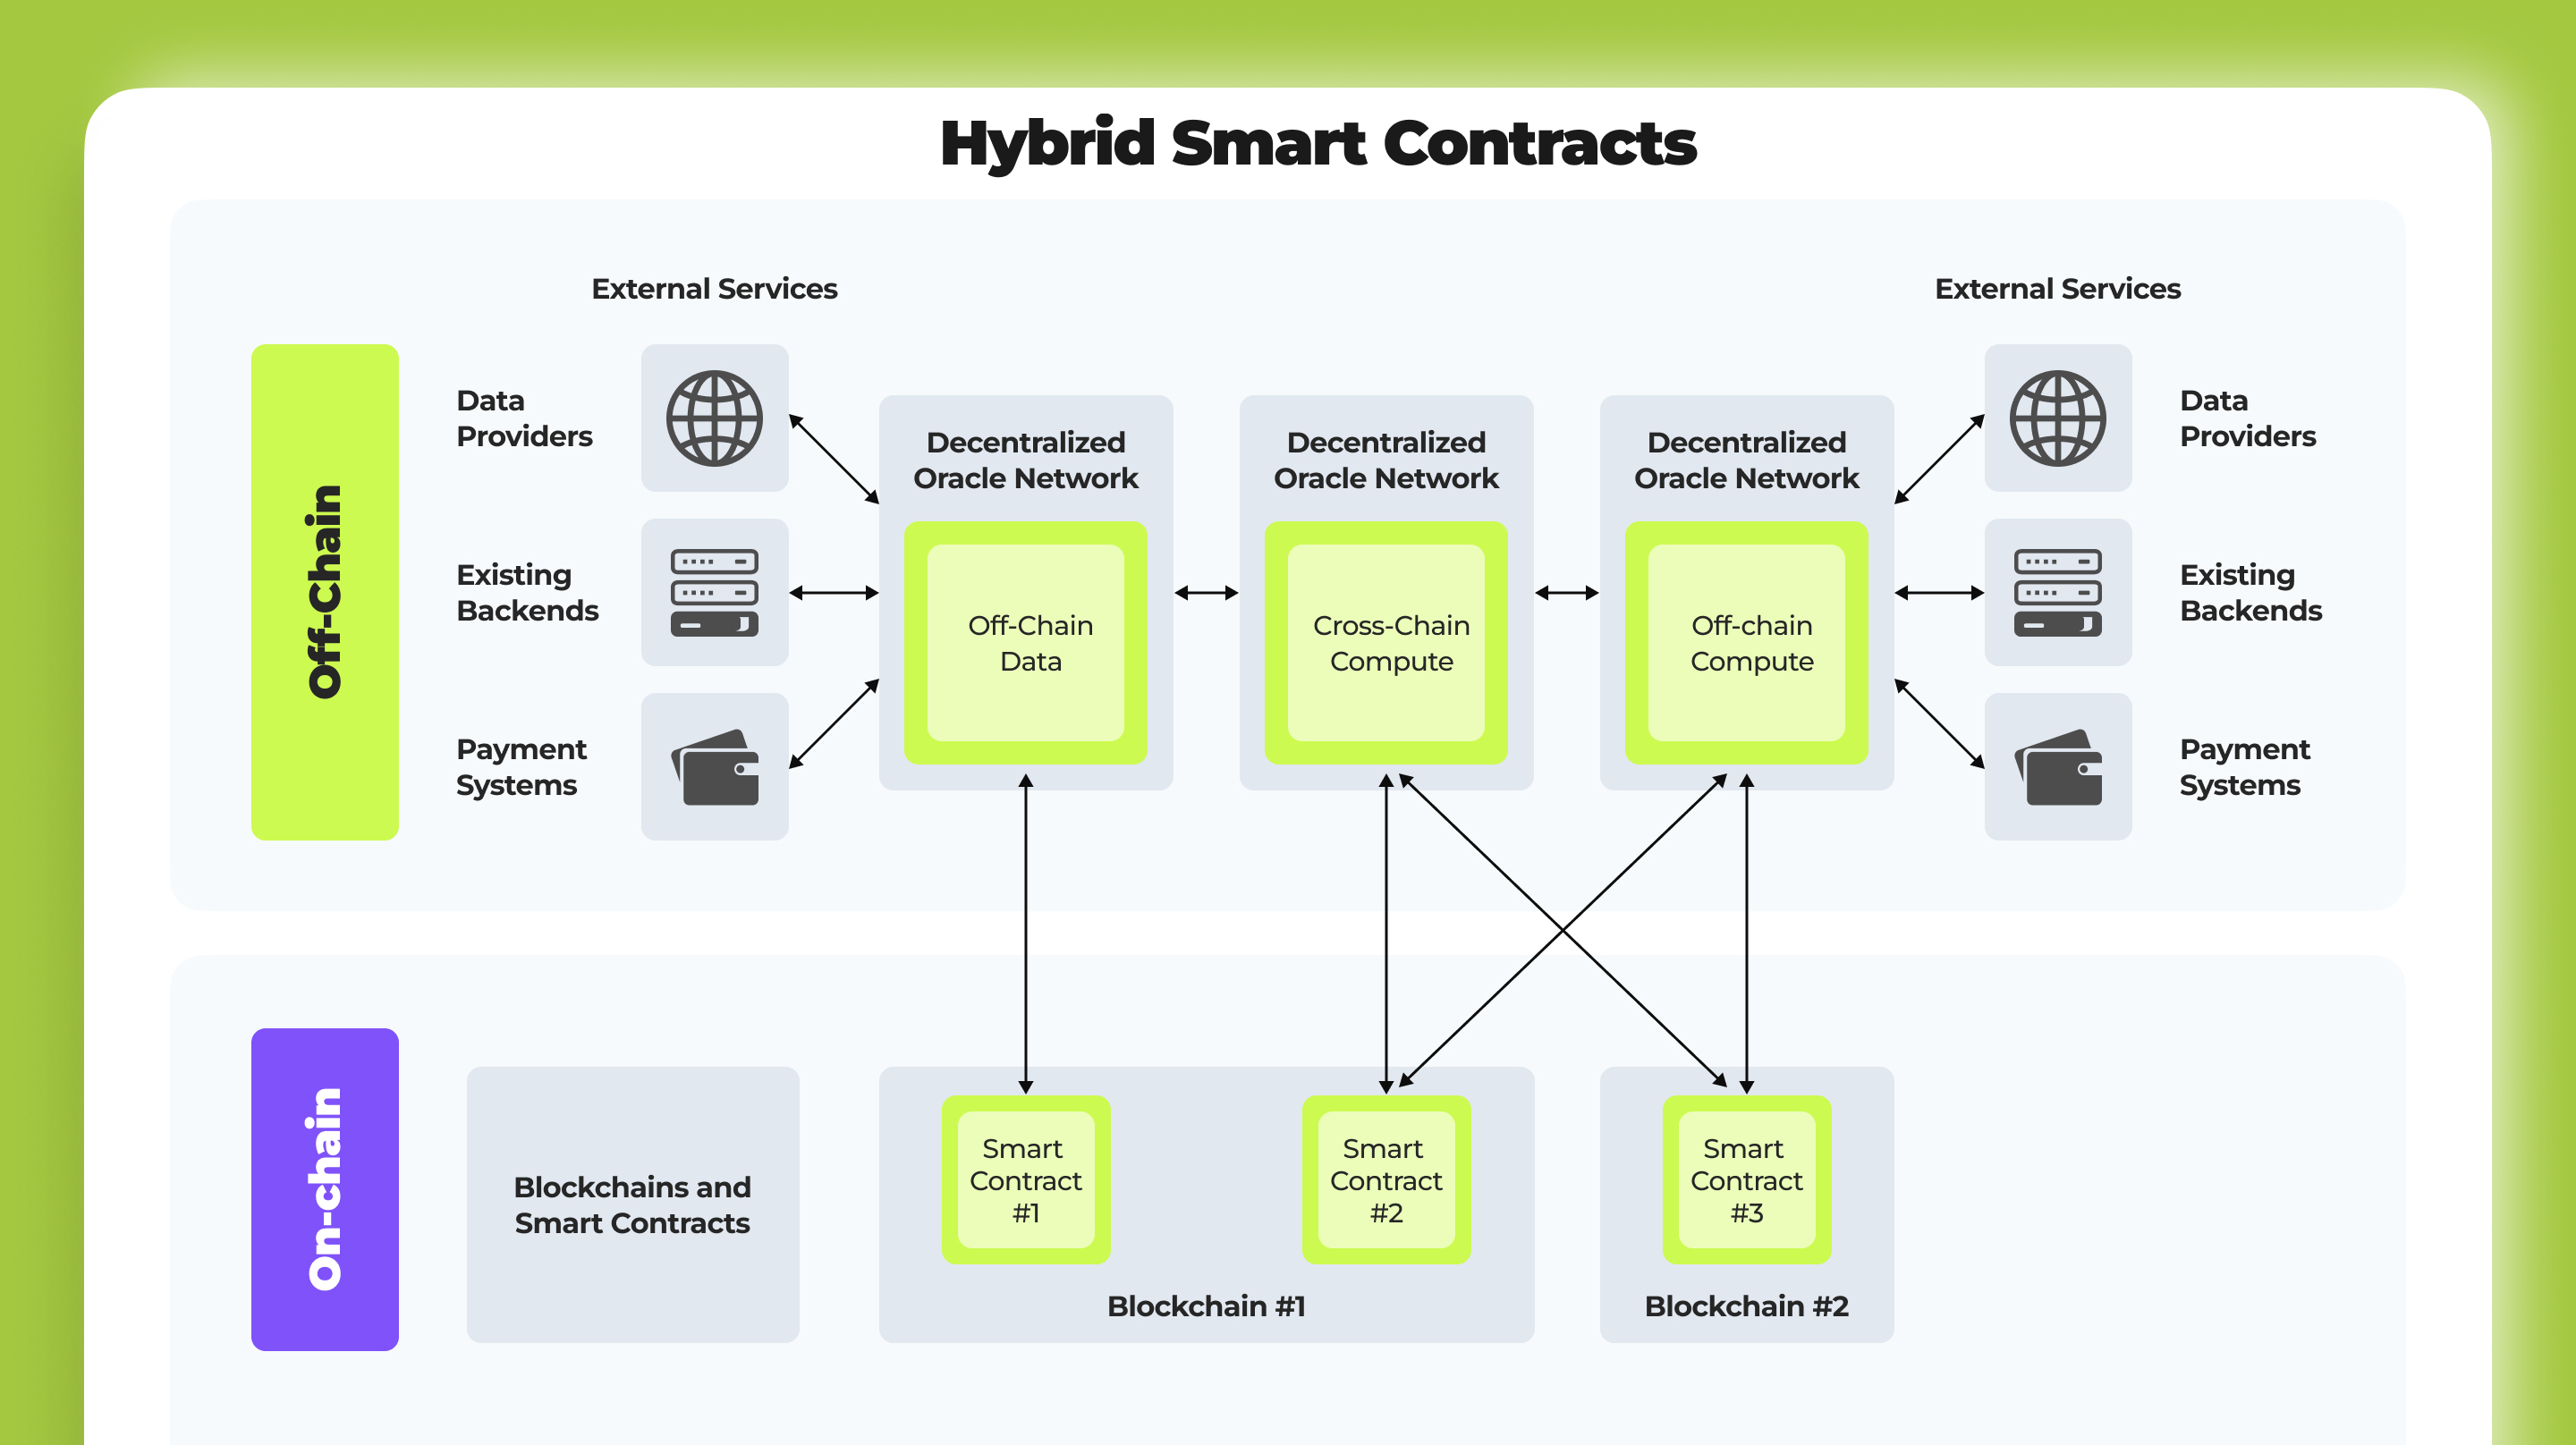 Various oracle models facilitate the development of mixed smart contracts depending on the use case.